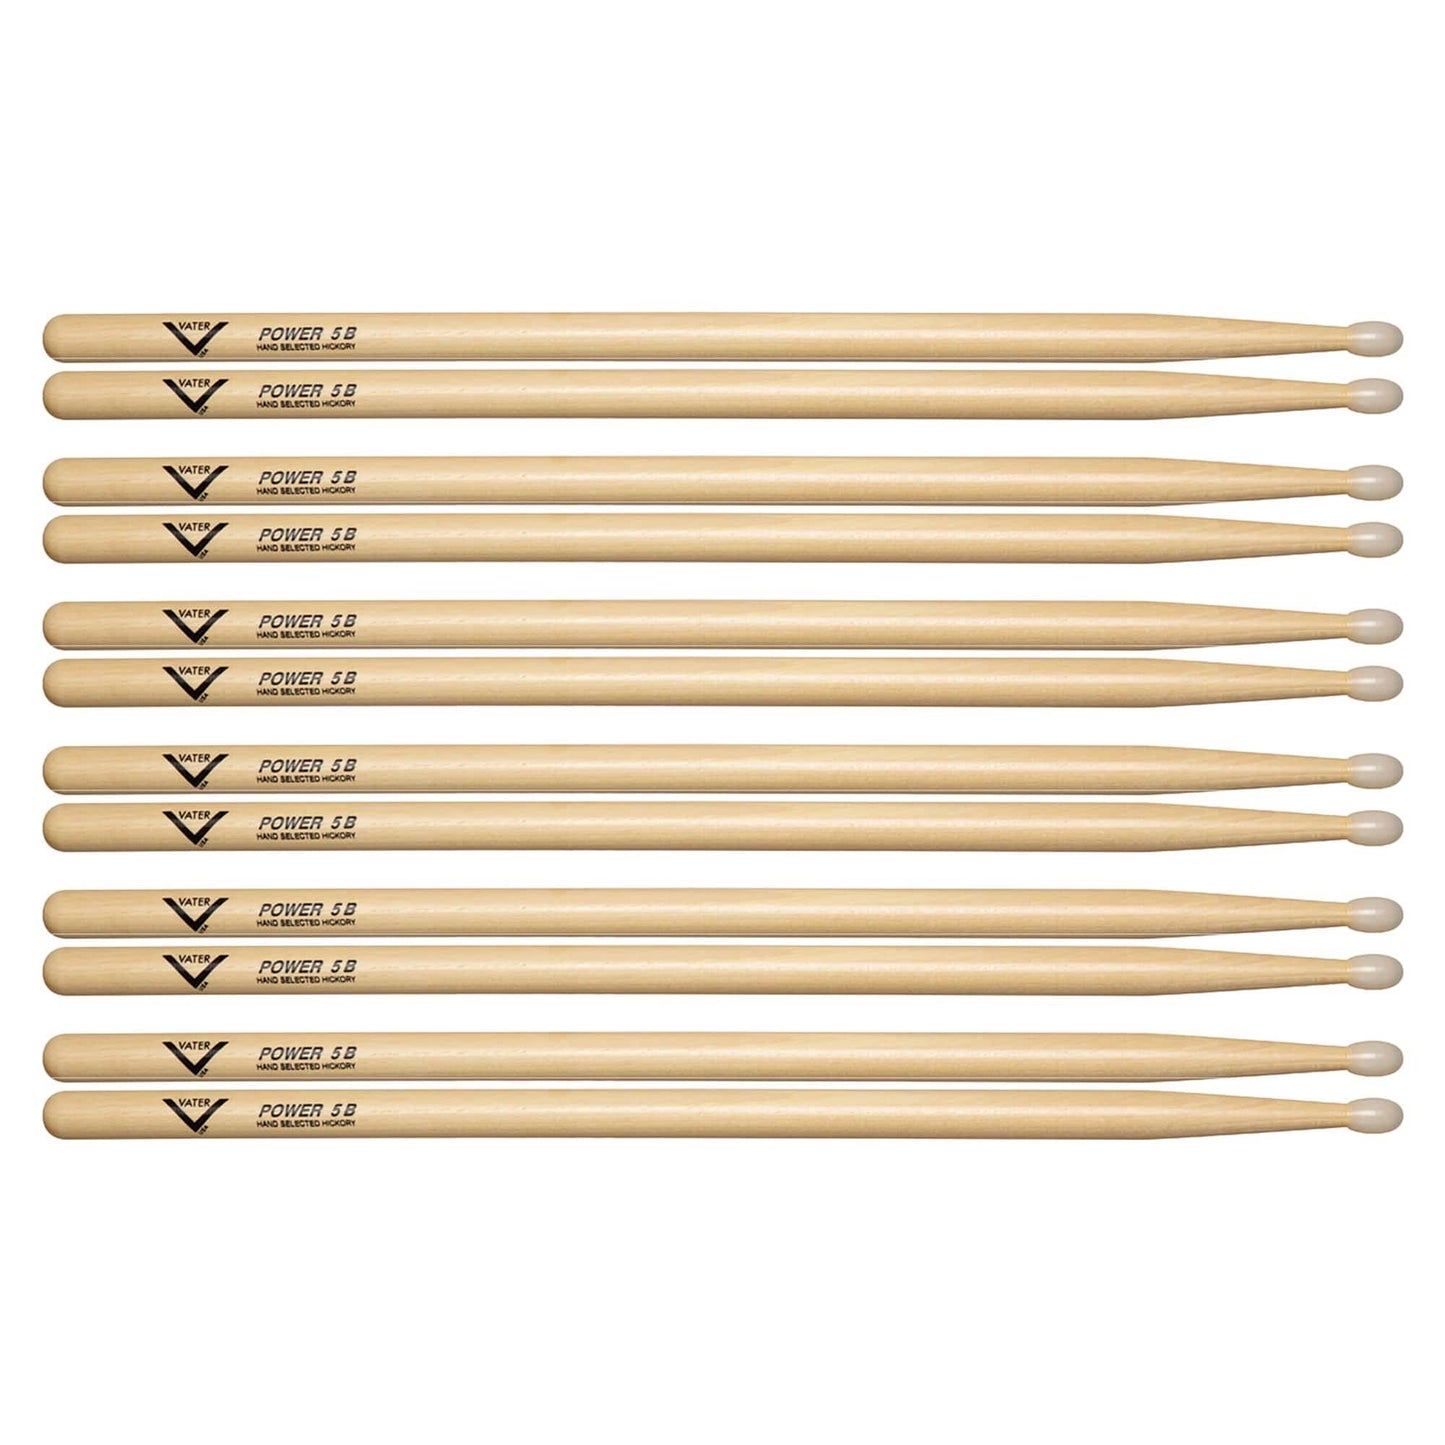 Vater Hickory Power 5B Nylon Tip Drum Sticks (6 Pair Bundle) Drums and Percussion / Parts and Accessories / Drum Sticks and Mallets